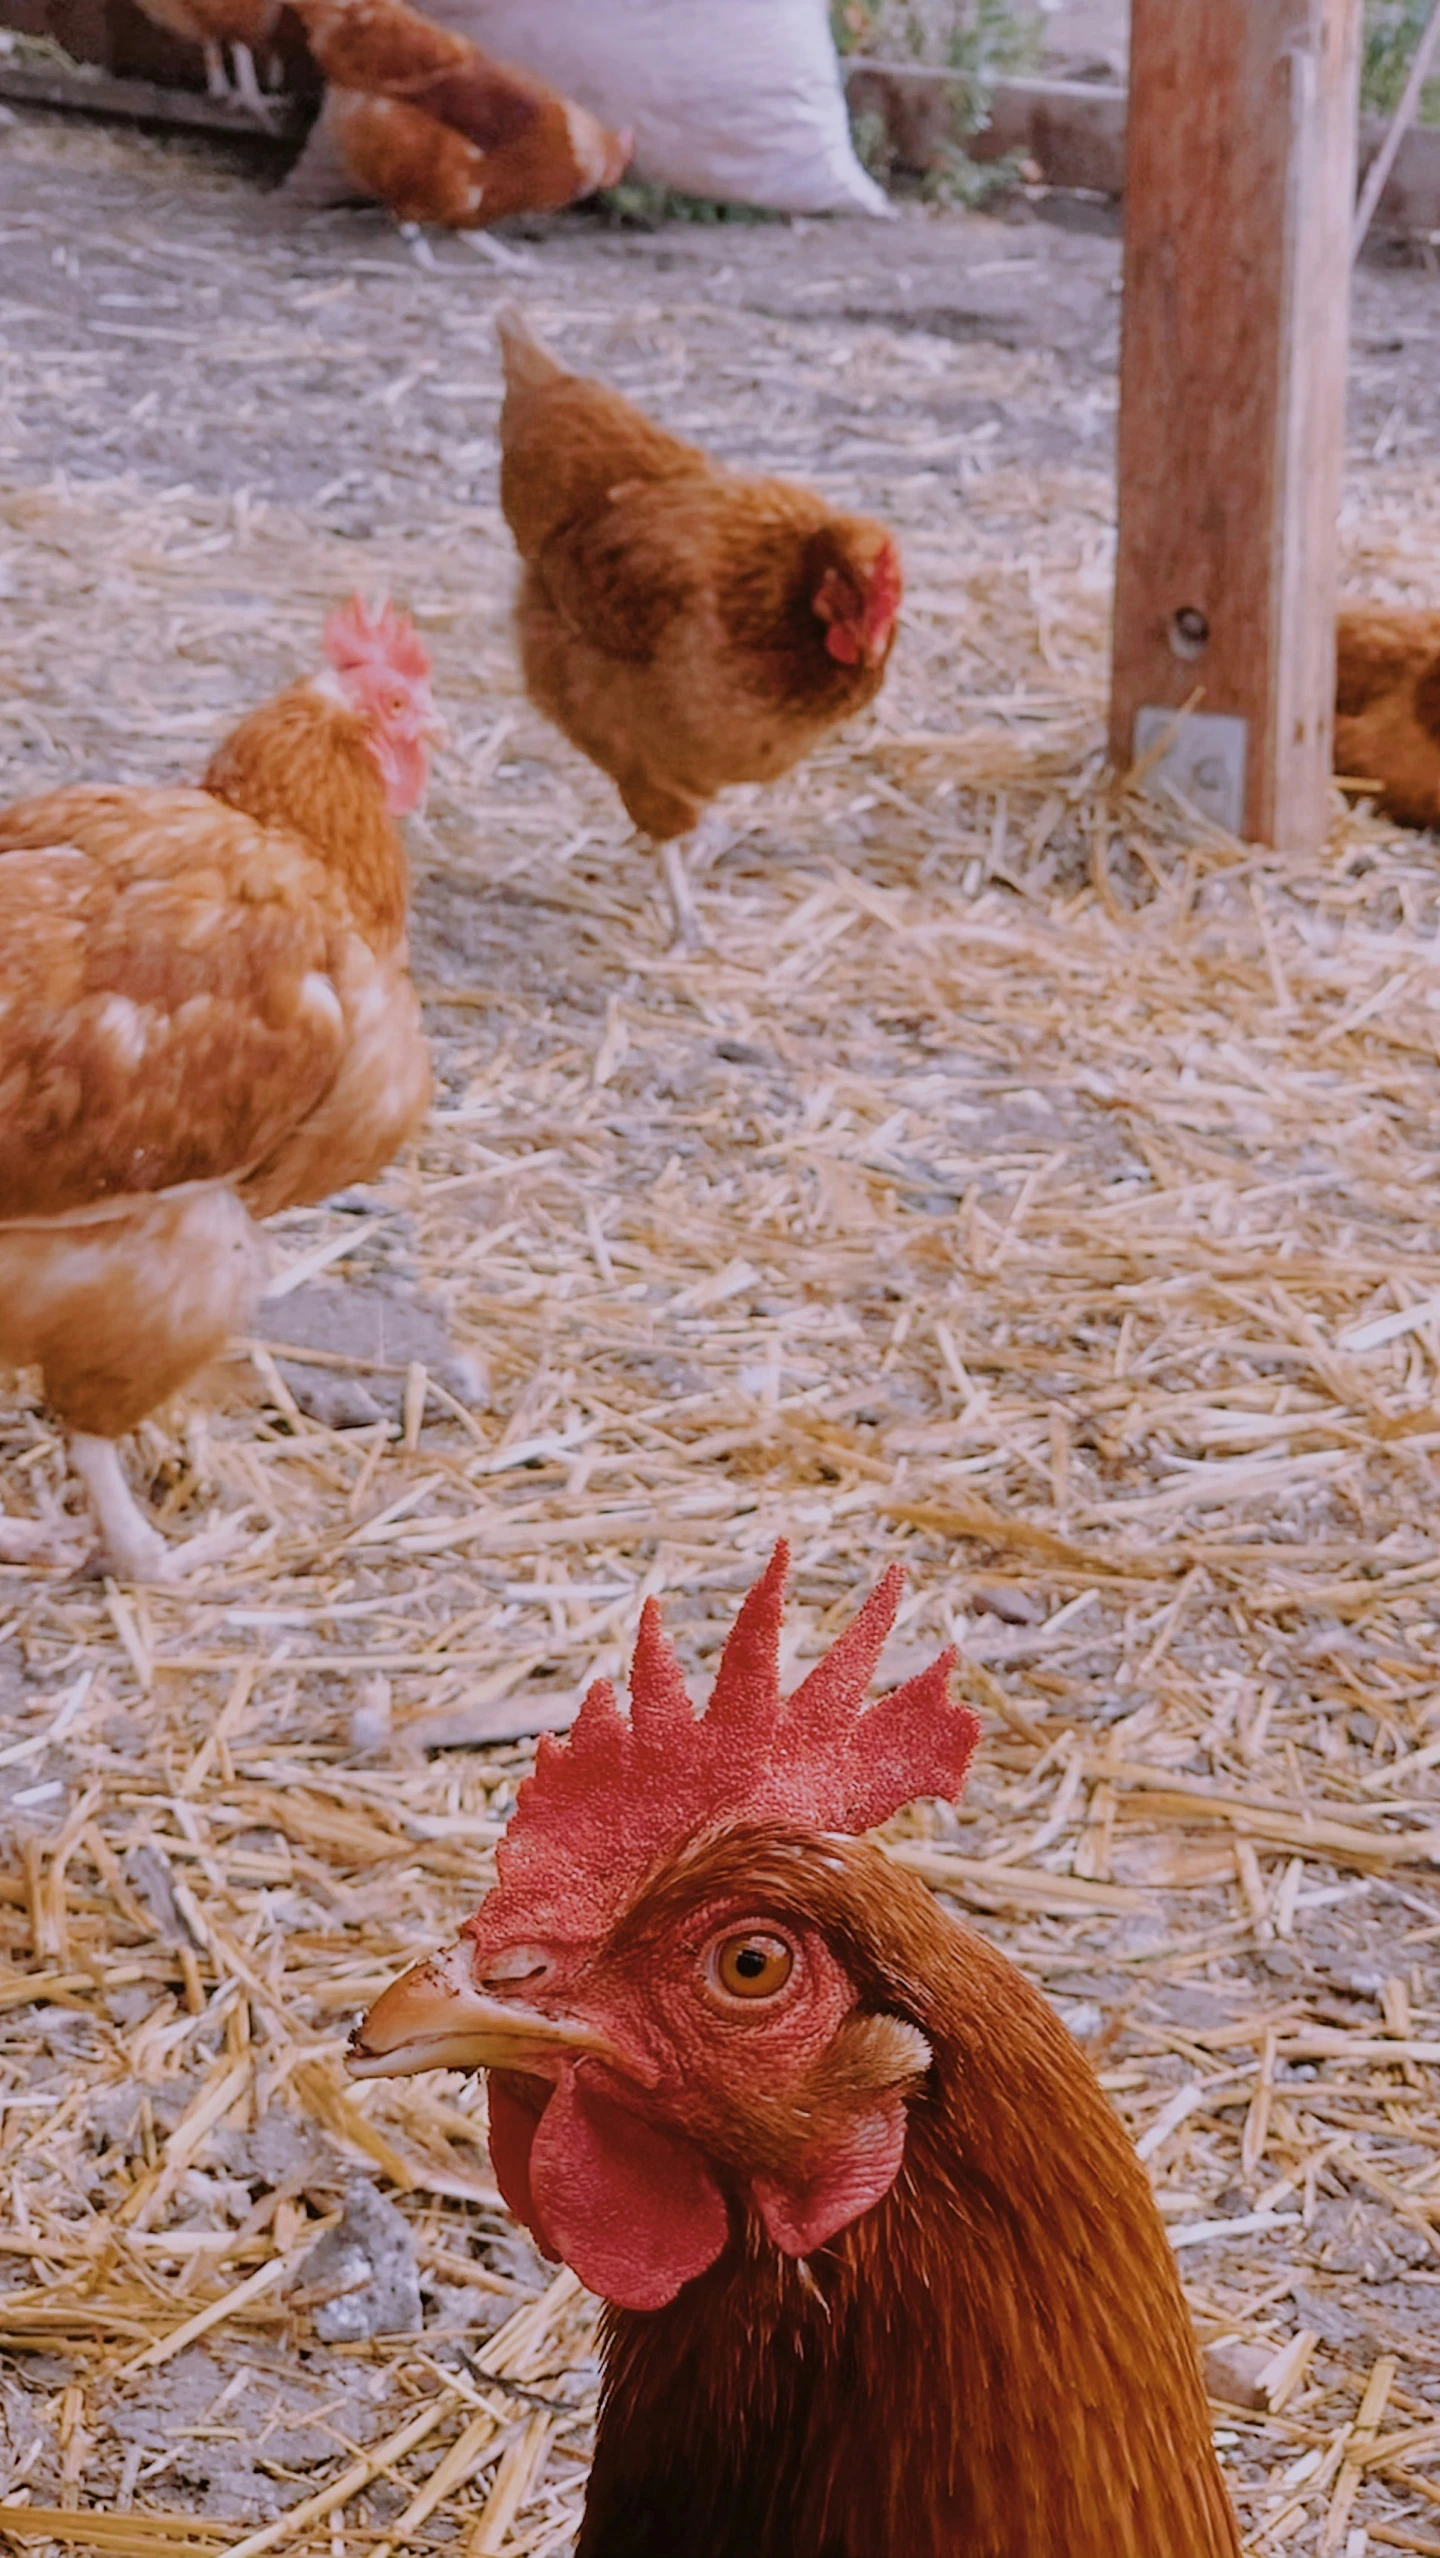 chickens in straw - covered area surrounded by fence posts